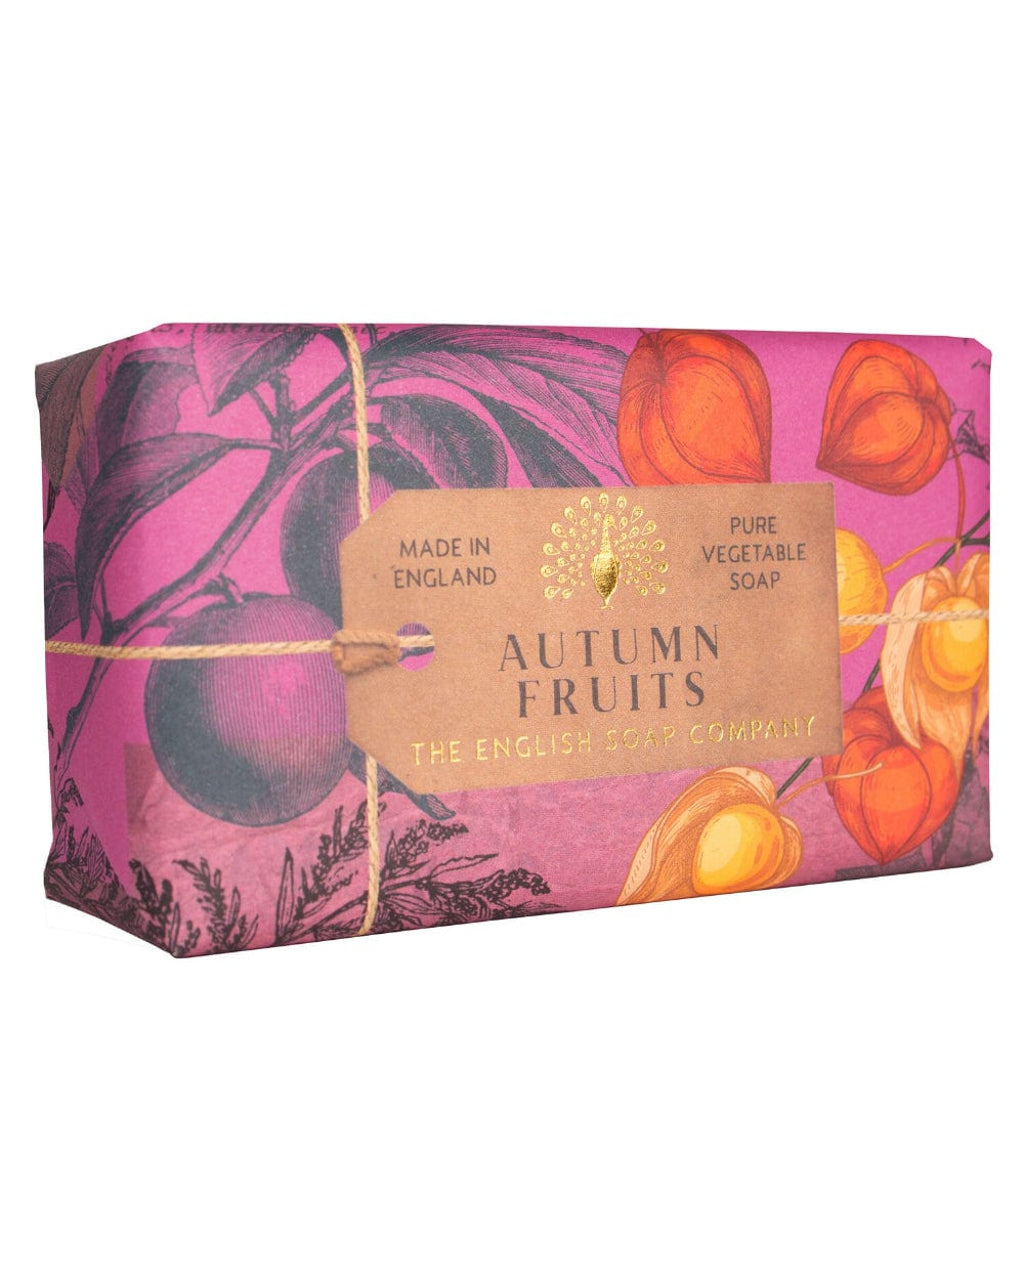 Anniversary Autumn Fruits Soap from our Luxury Bar Soap collection by The English Soap Company